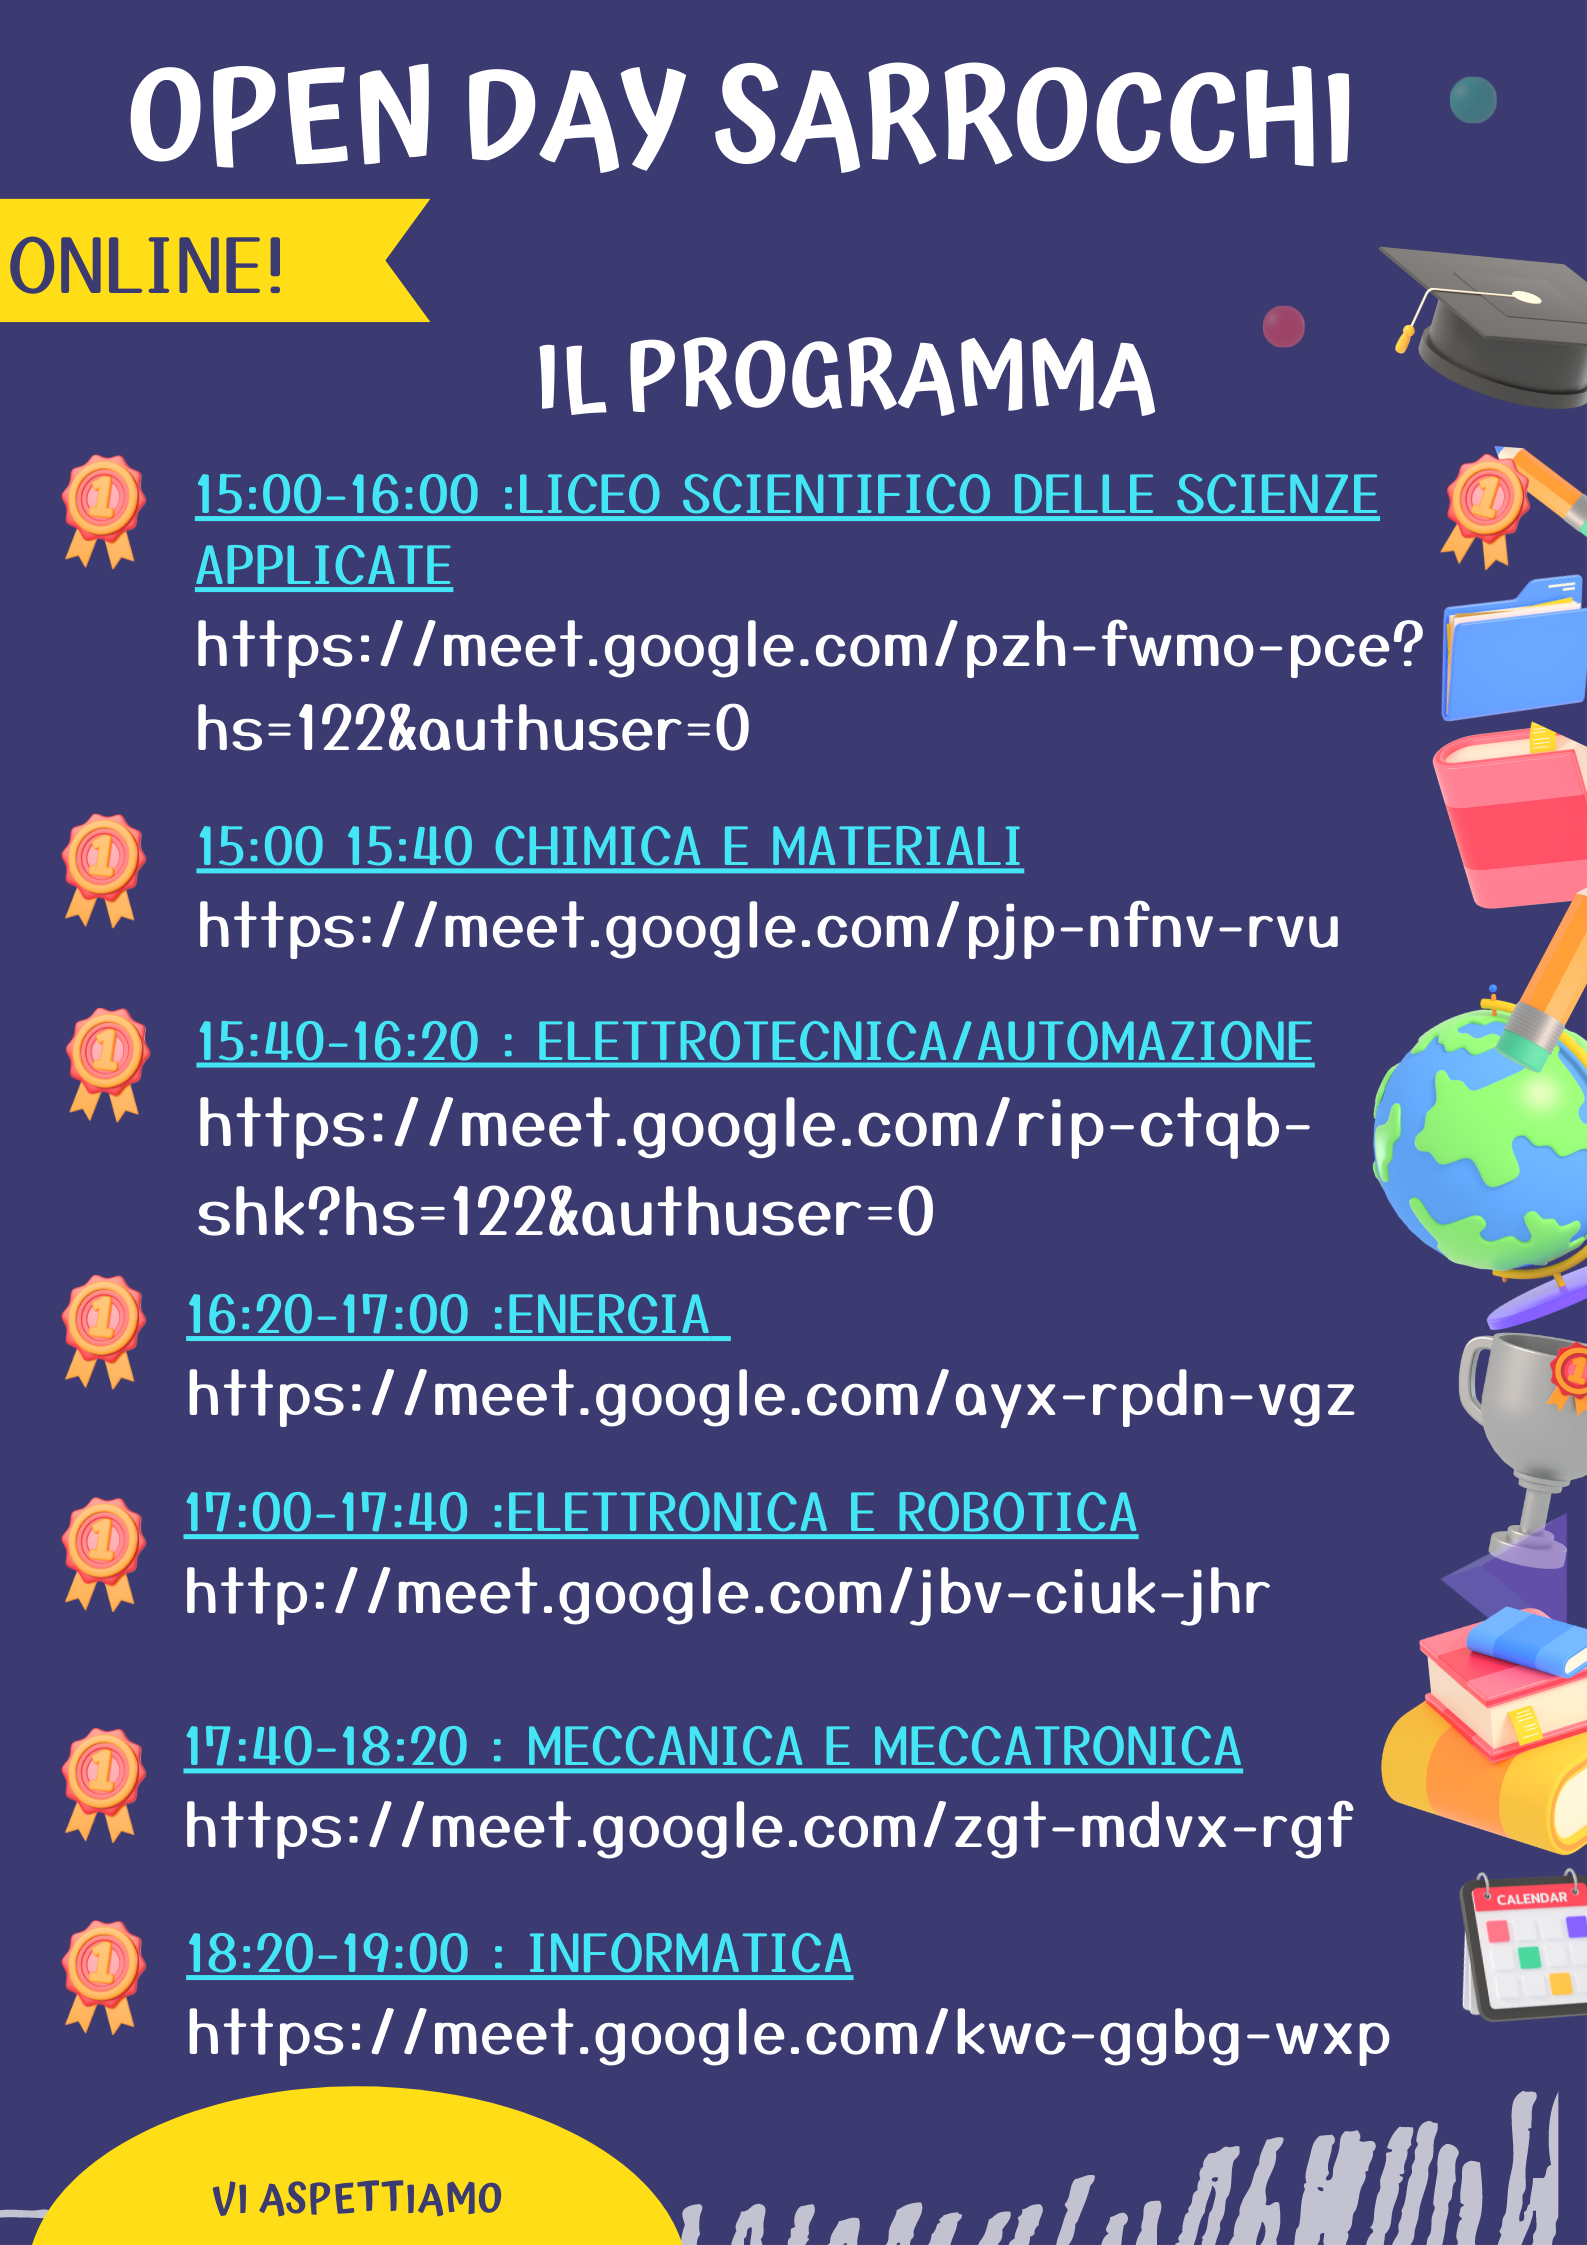 open day sarrocchi ONLINE.png